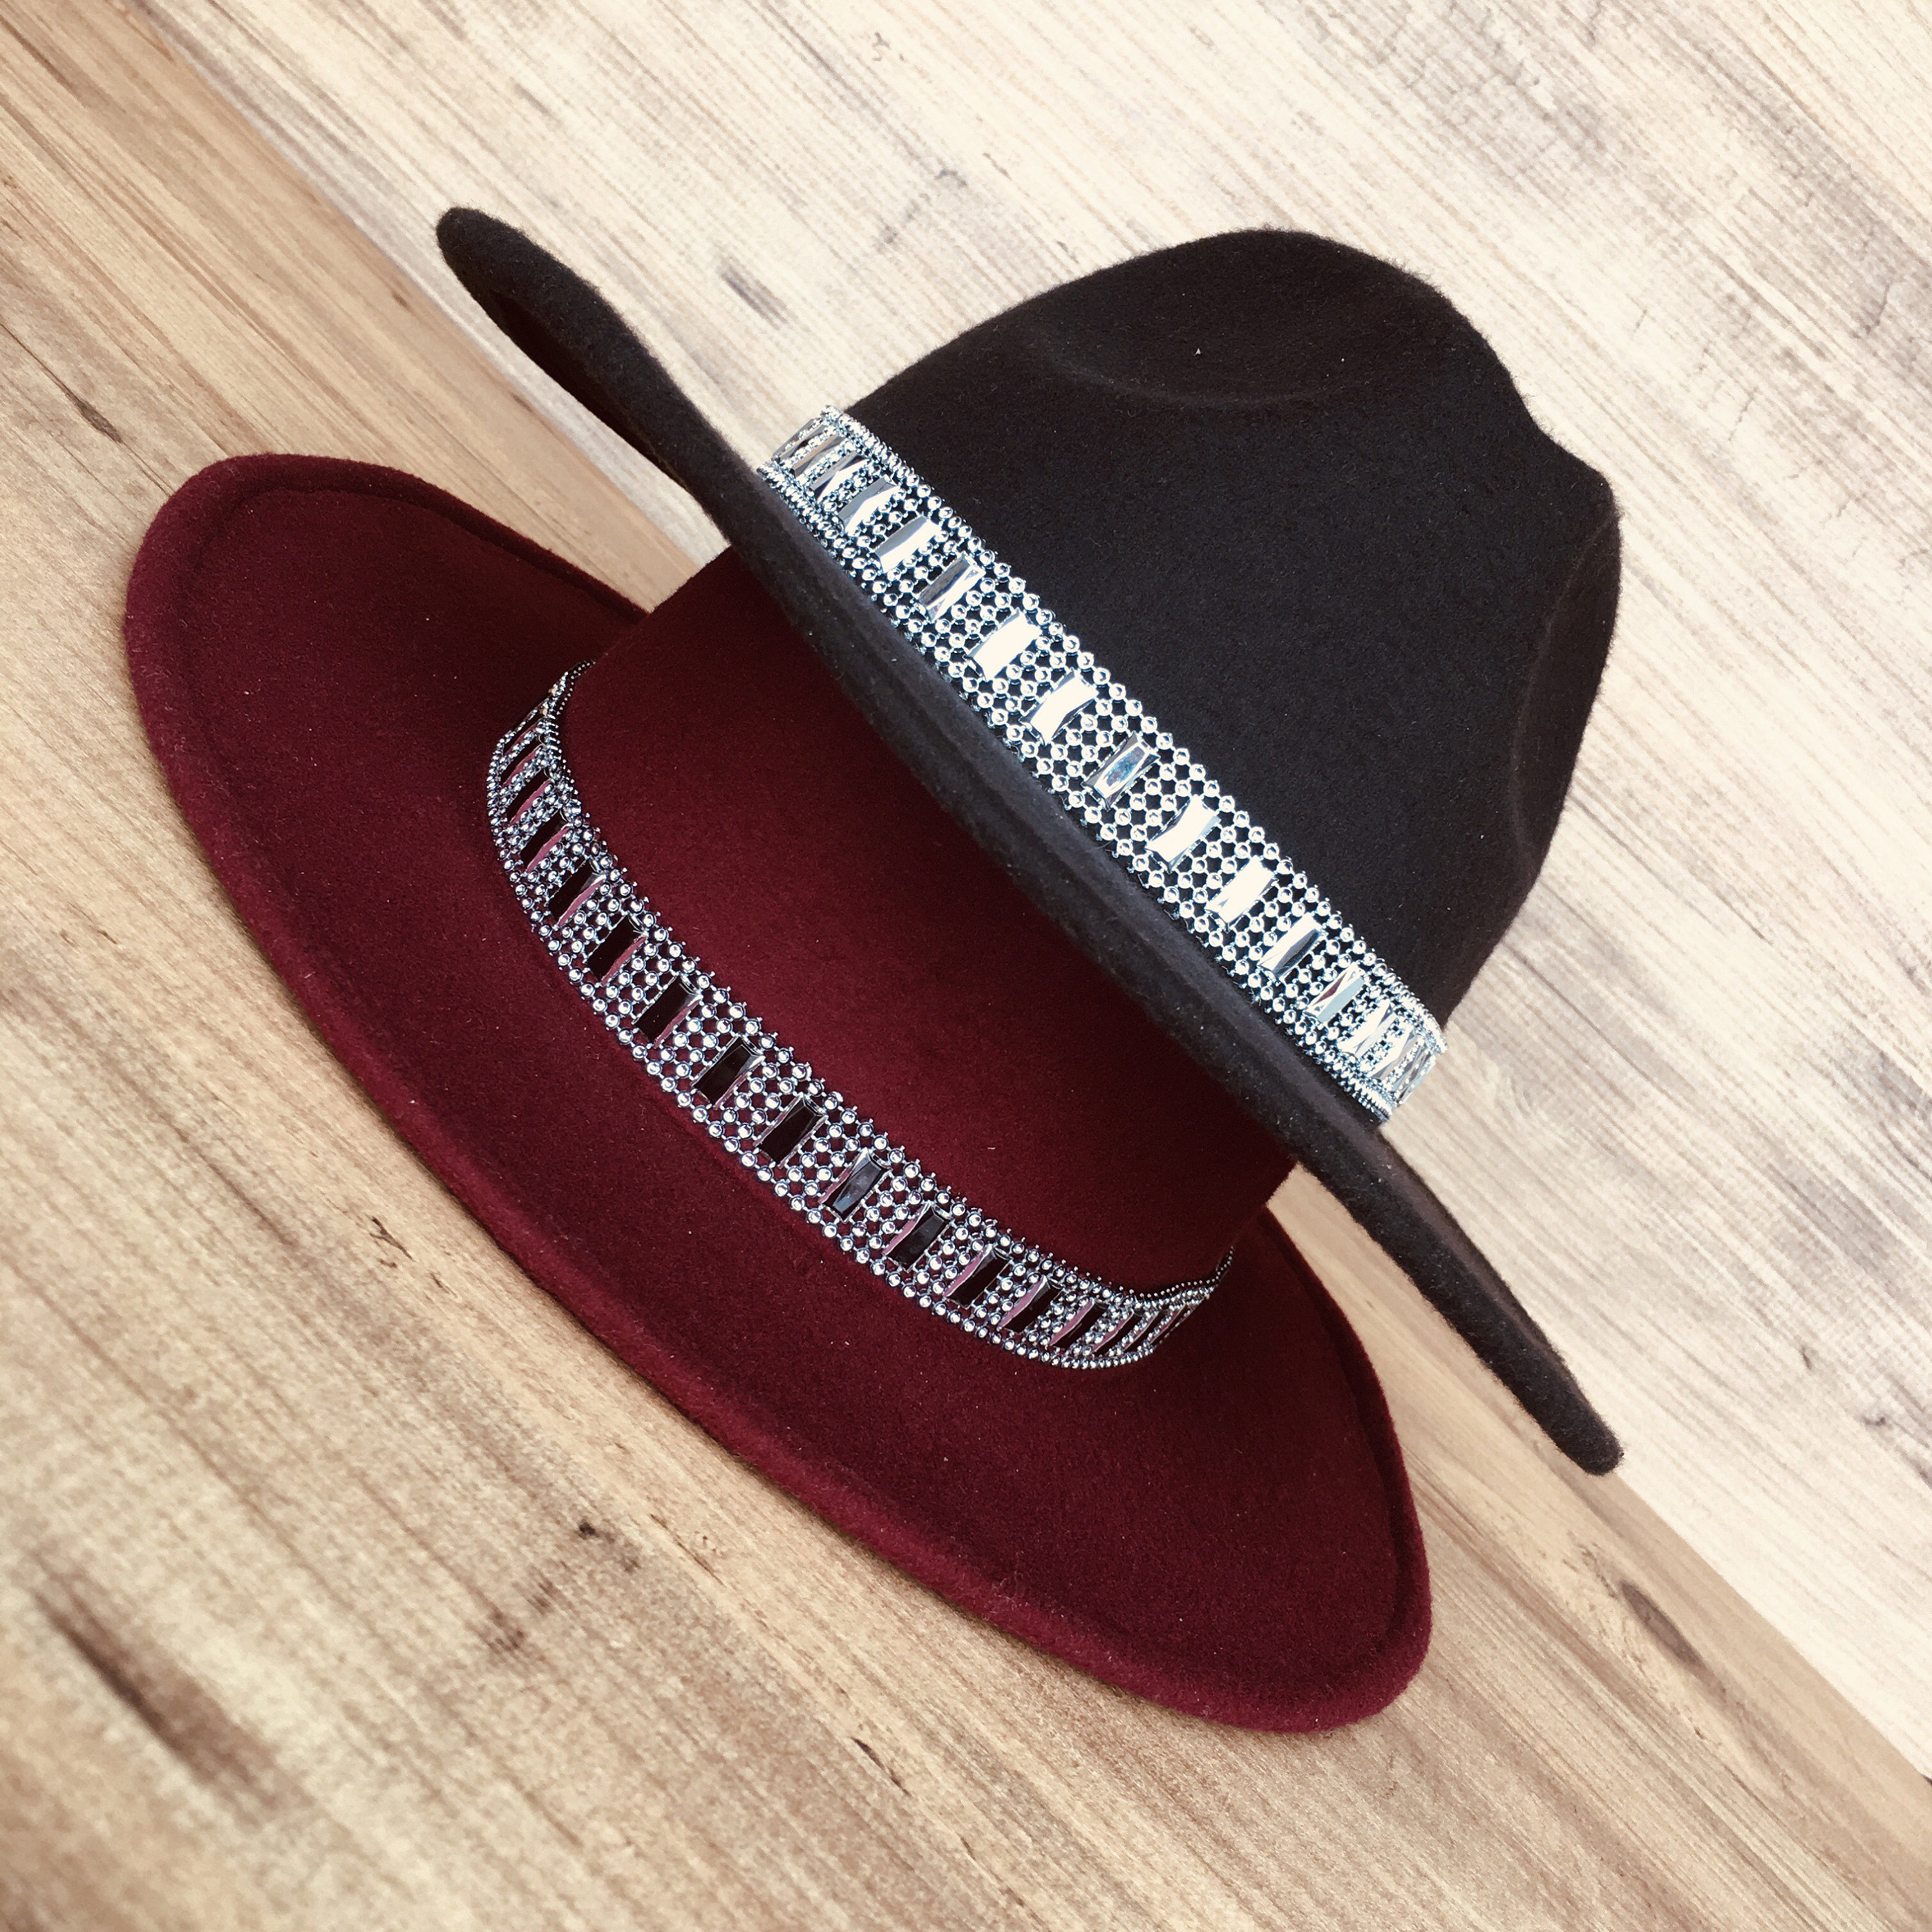 Hat band, Cowboy hat Accessories, Adjustable Fedora Hatband, Unisex Western  Hat Jewelry, Cowgirl Hat band, Hatband for women (Pink, Black, Silver)